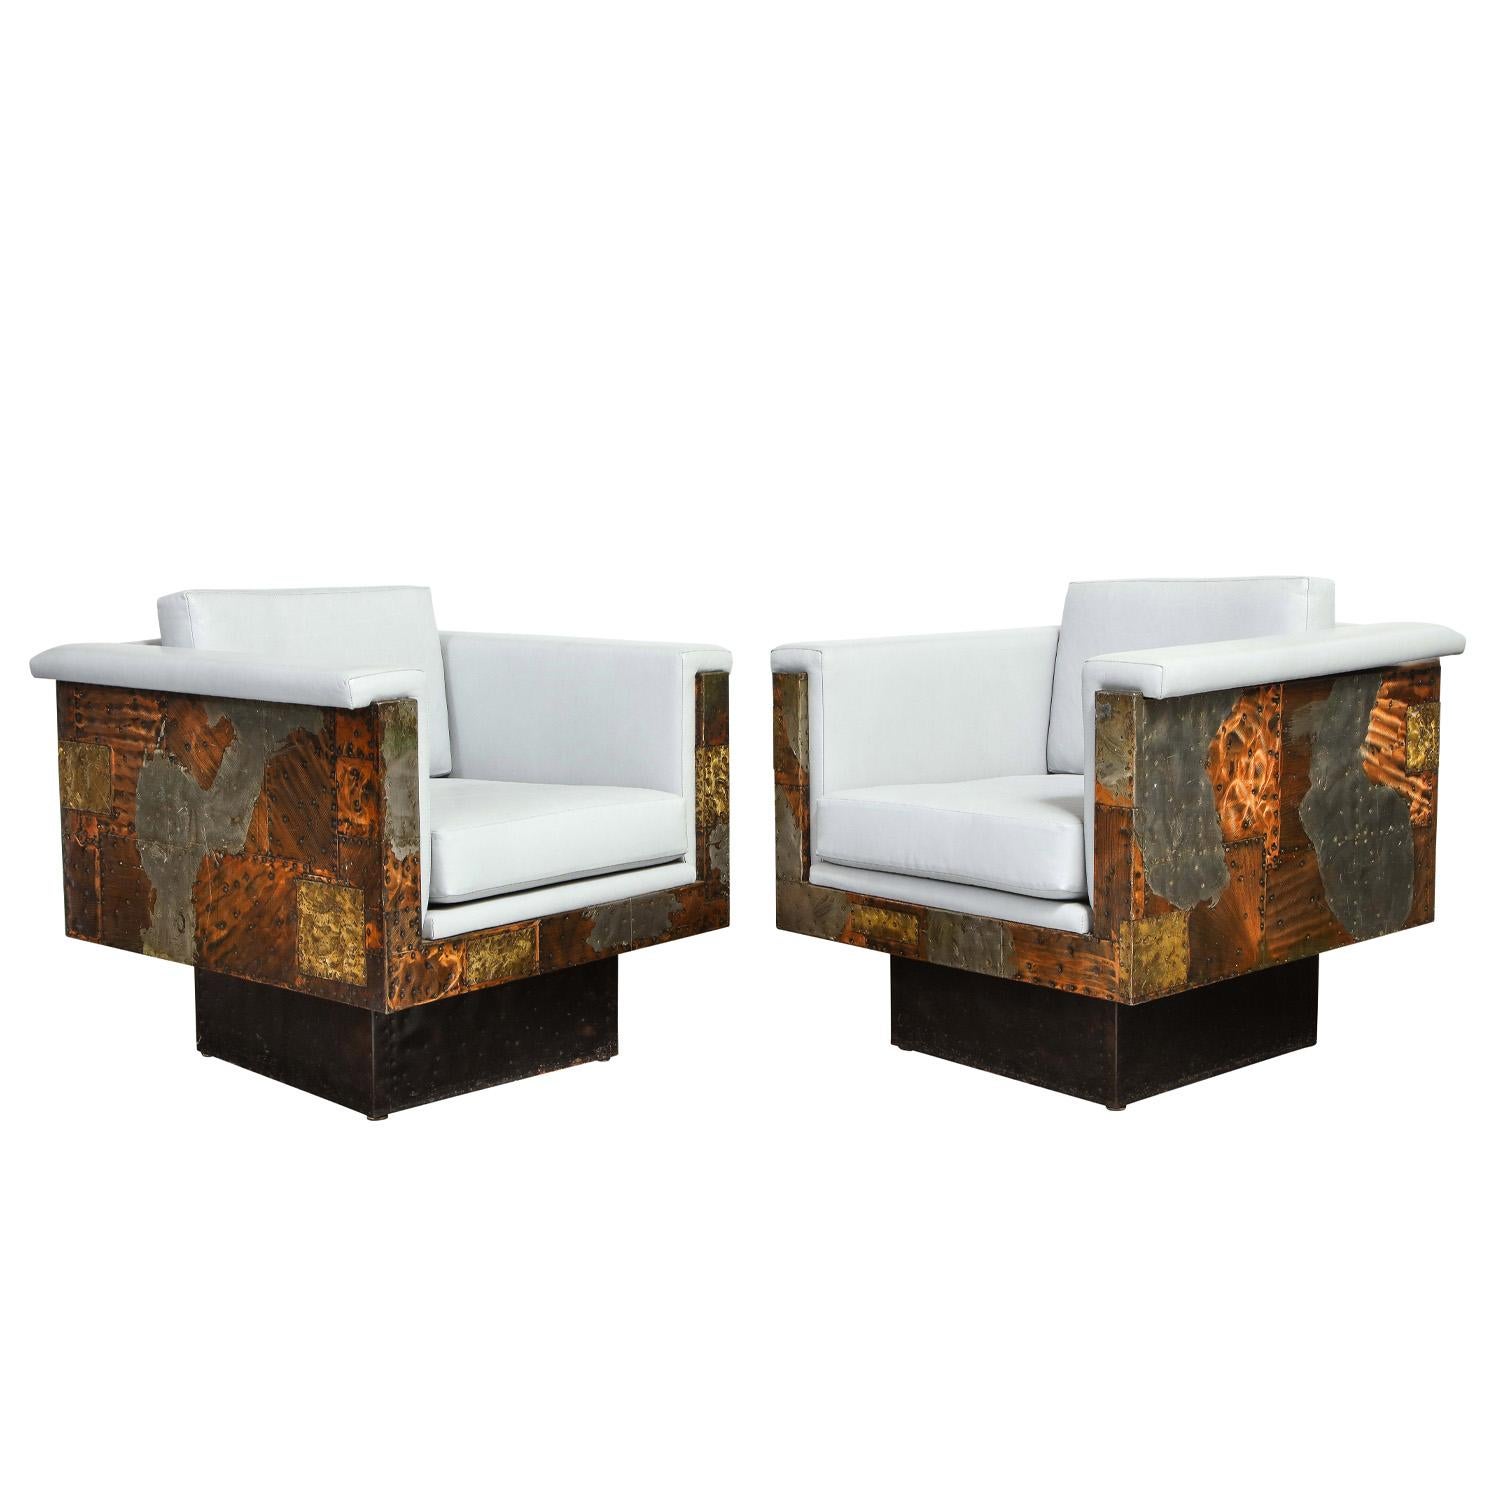 Pair of rare swiveling patchwork cube lounge chairs in hand-welded bronze copper and steel on ebonized wood bases by Paul Evans Studio for Directional, 1970's. These chairs are works of art by one of the 20th century’s most important designers.